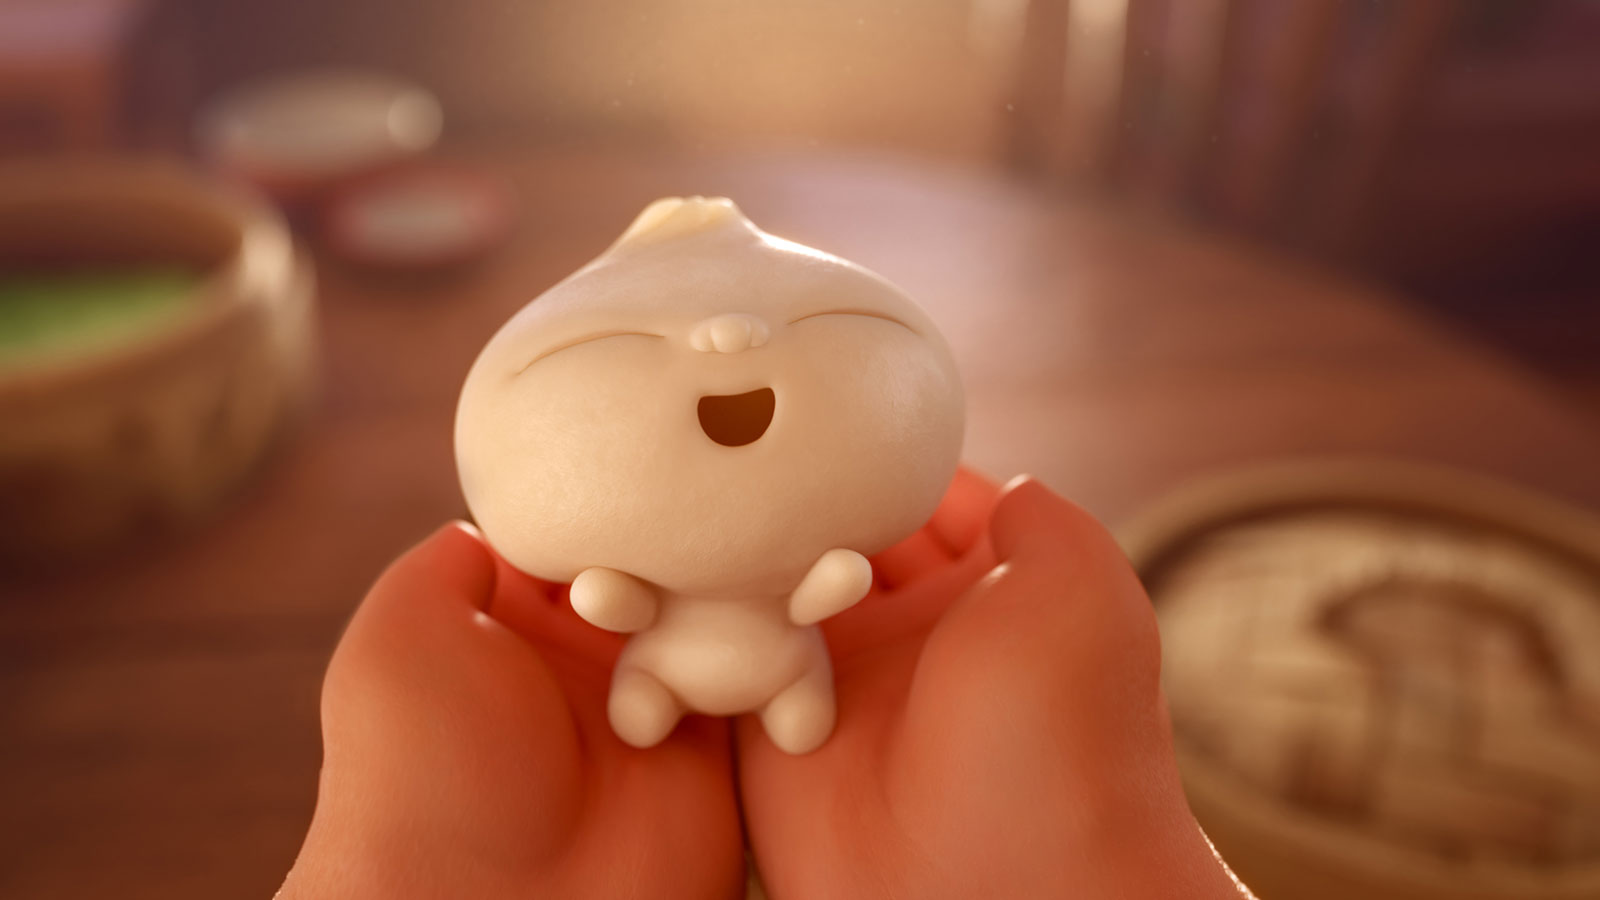 I Bet You Can’t Identify More Than 10/15 of These Pixar Movie Foods Bao